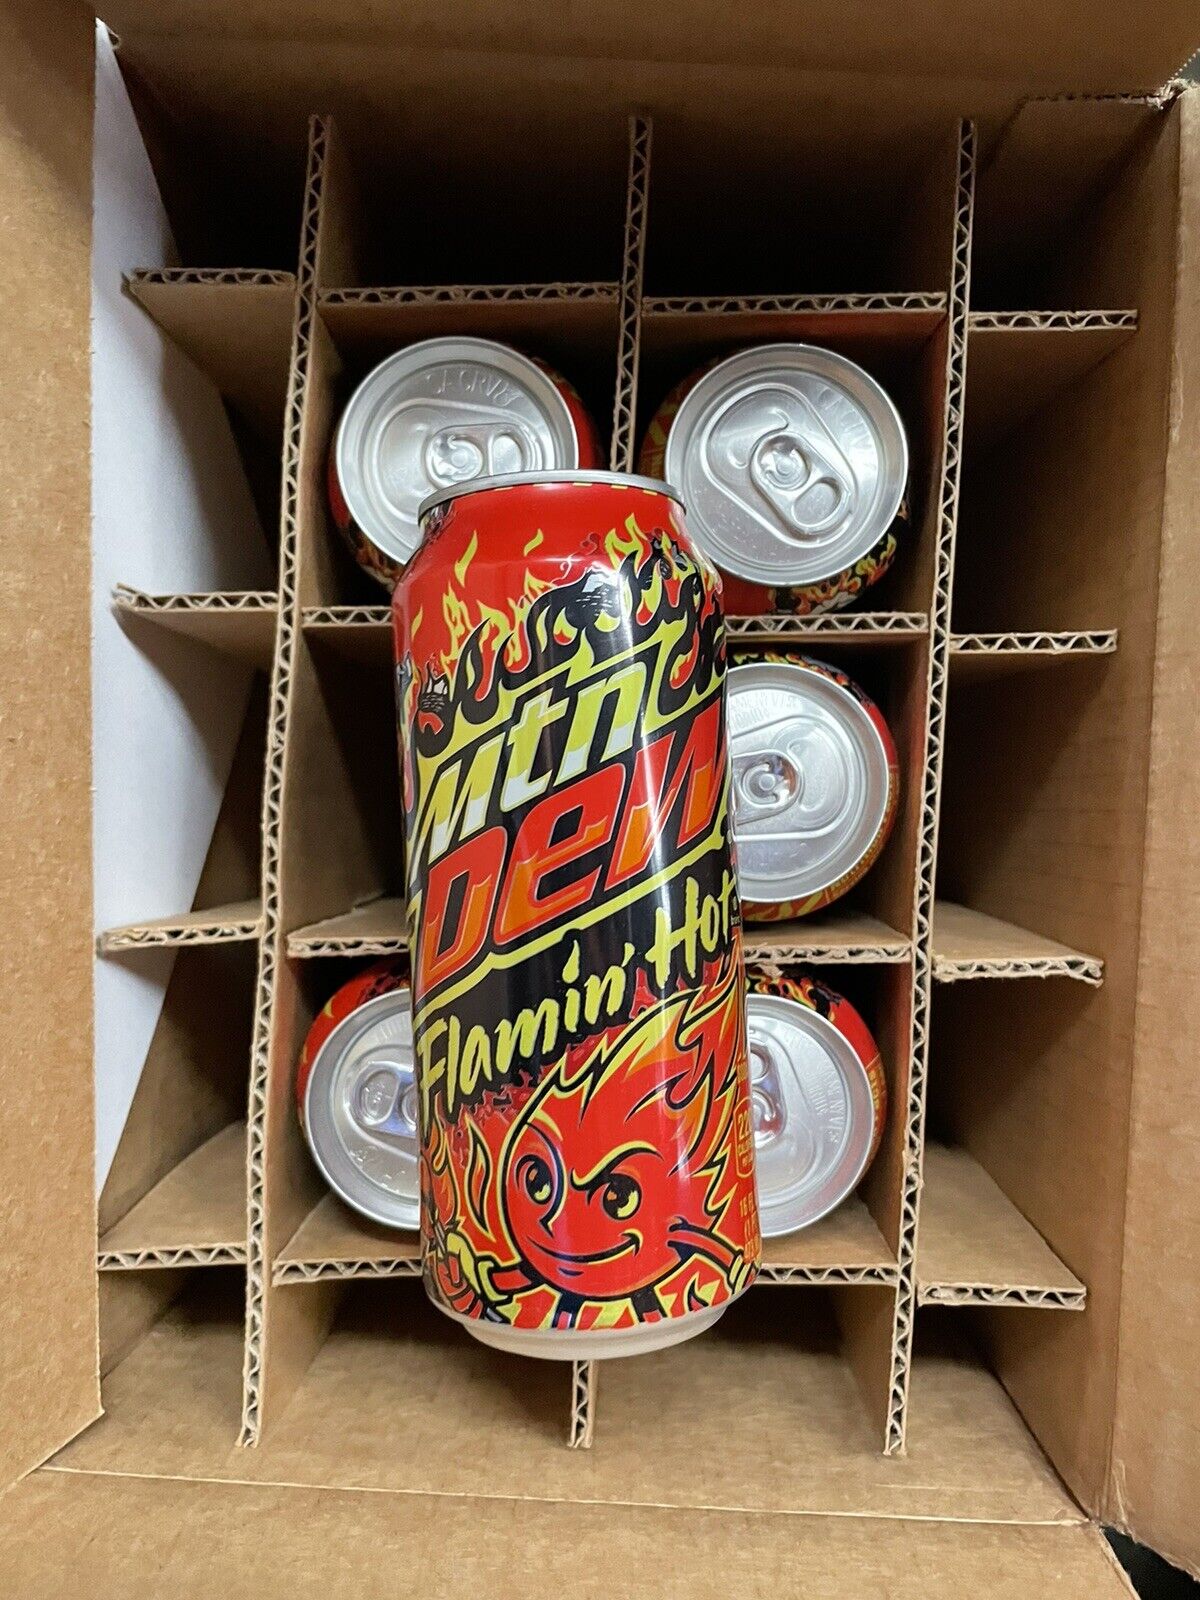 New Unopened Mountain Dew Limited Edition Flaming Hot Single 16oz Can In Hand